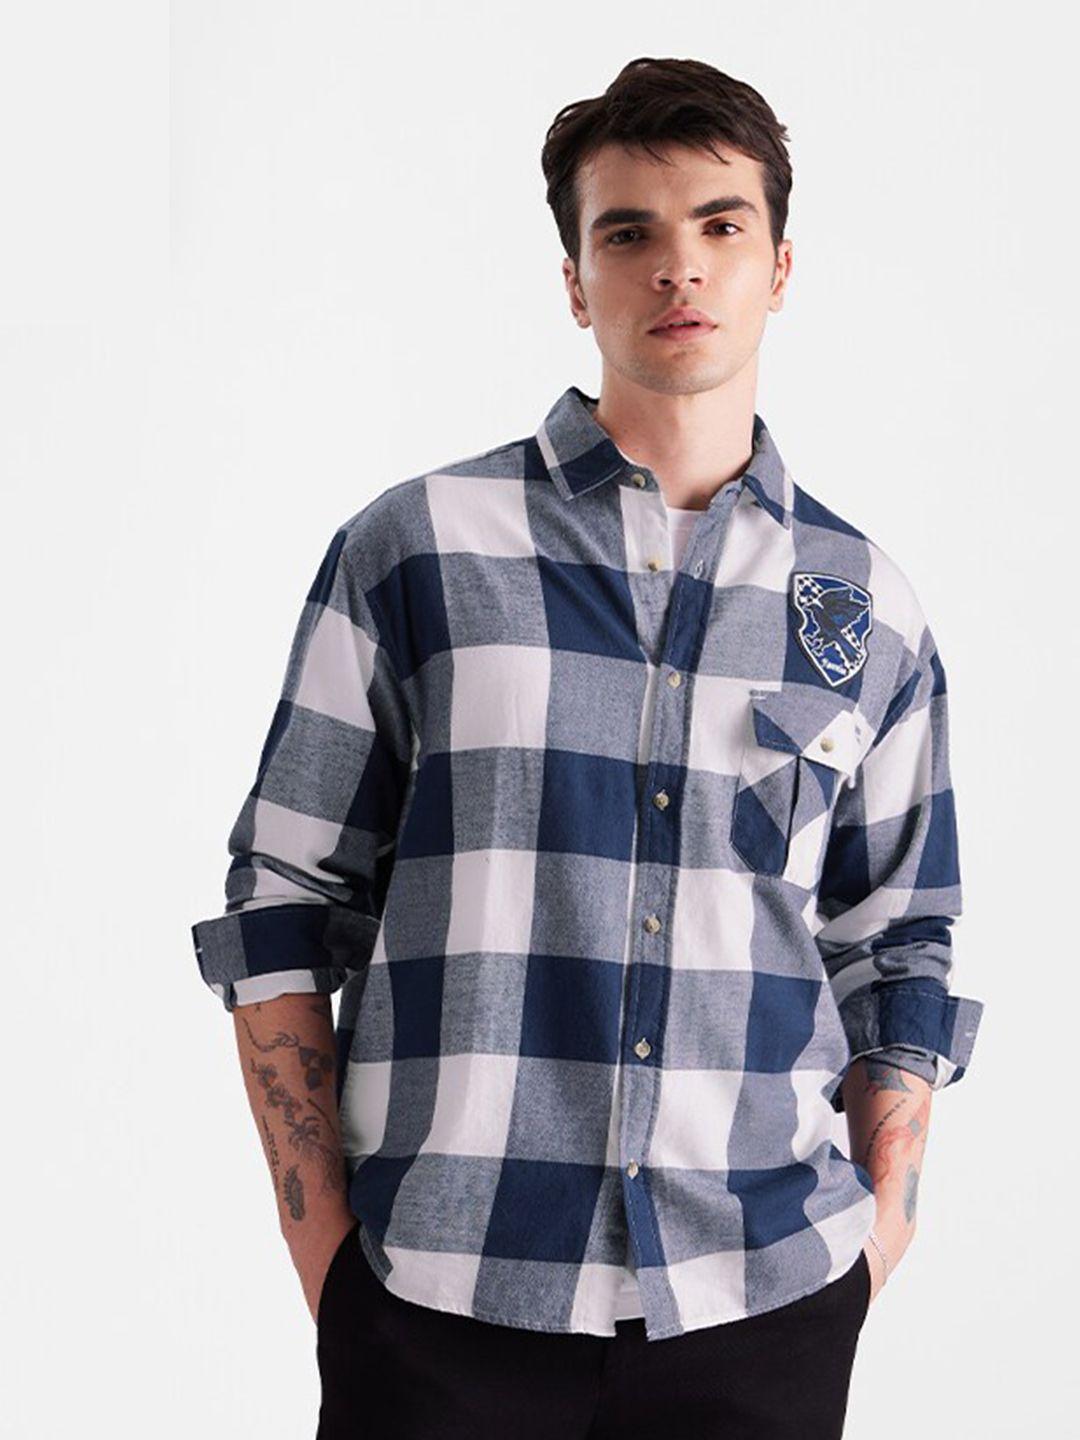 the souled store navy blue checked spread collar applique pure cotton casual shirt